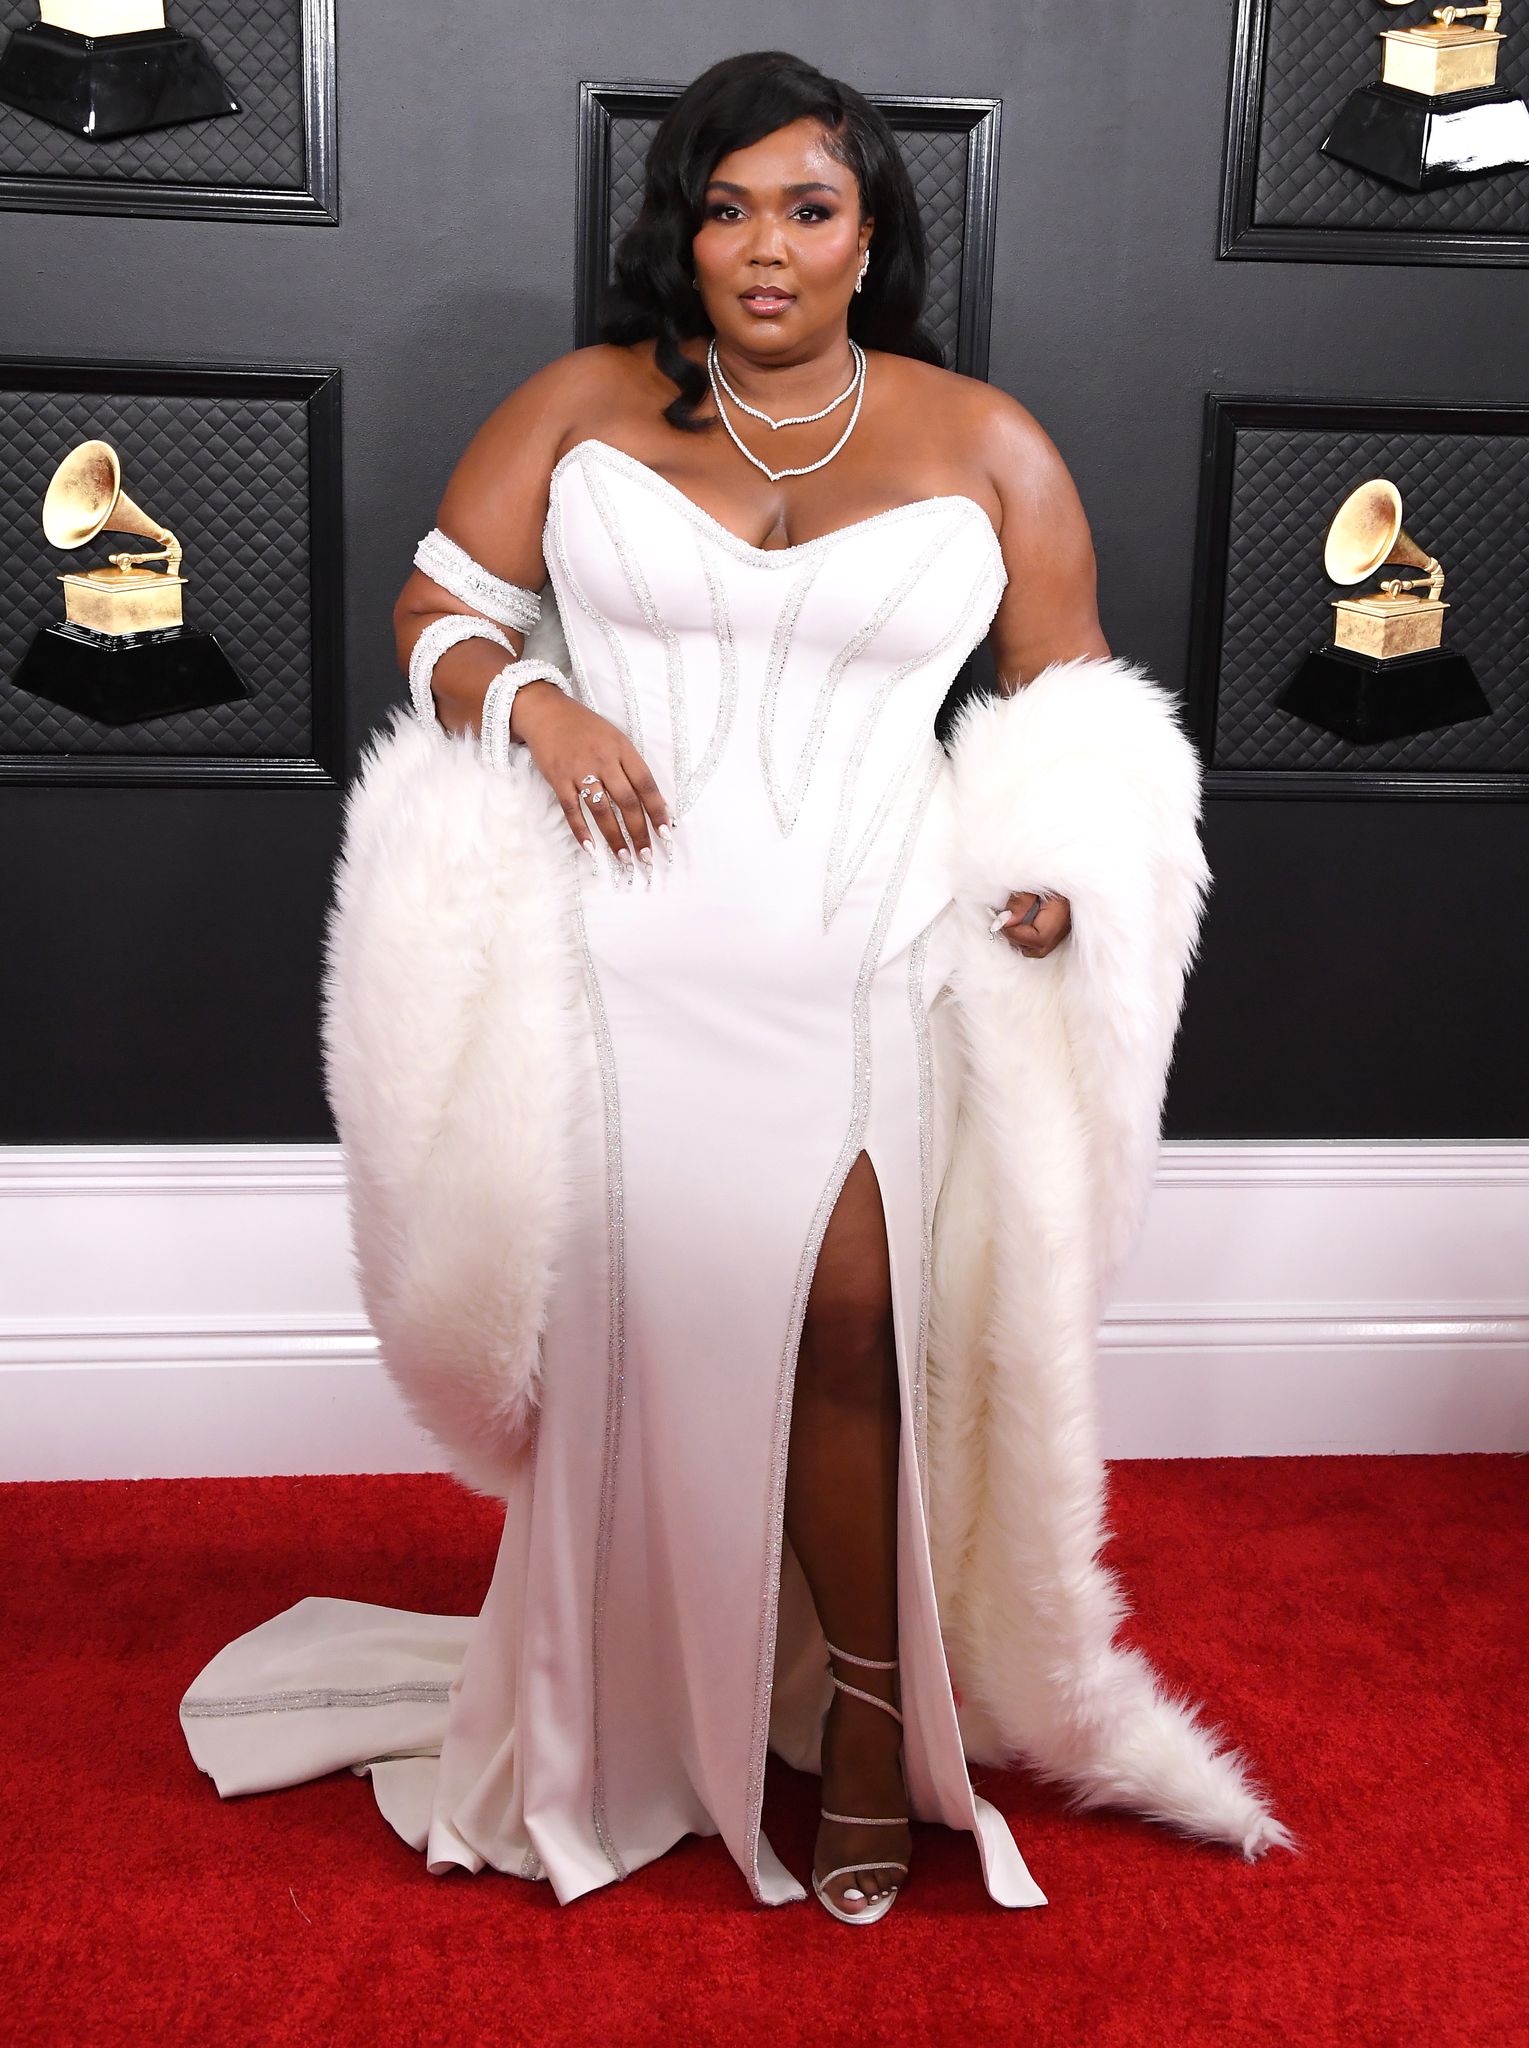 Lizzo during the 62nd Annual GRAMMY Awards at Staples Center on January 26, 2020 in Los Angeles, California. | Source: Getty Images